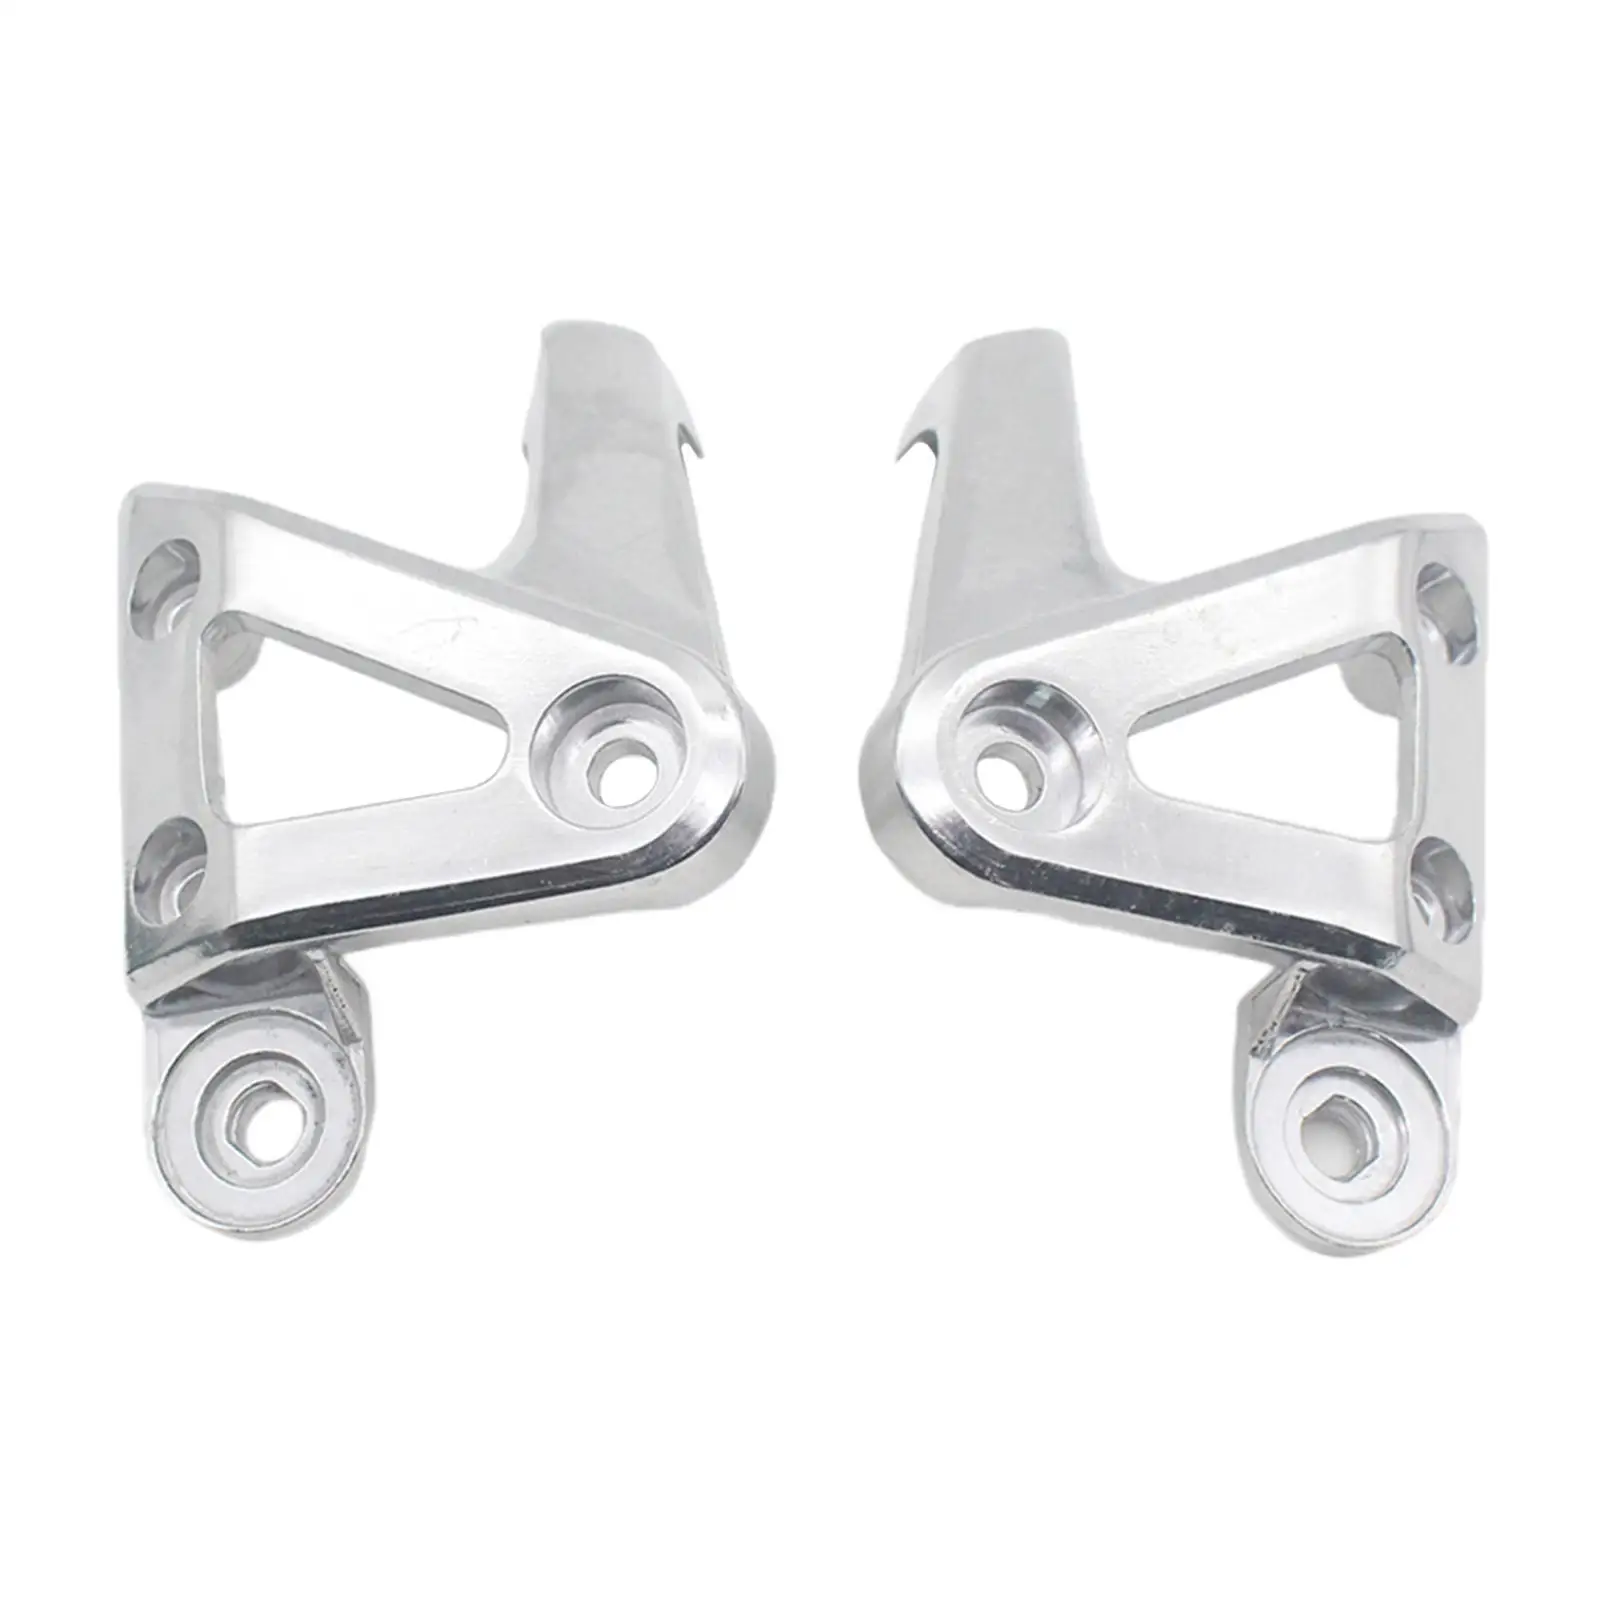 Aluminum Alloy Motorcycles Headlight Holders Brackets for Honda Replace Acc